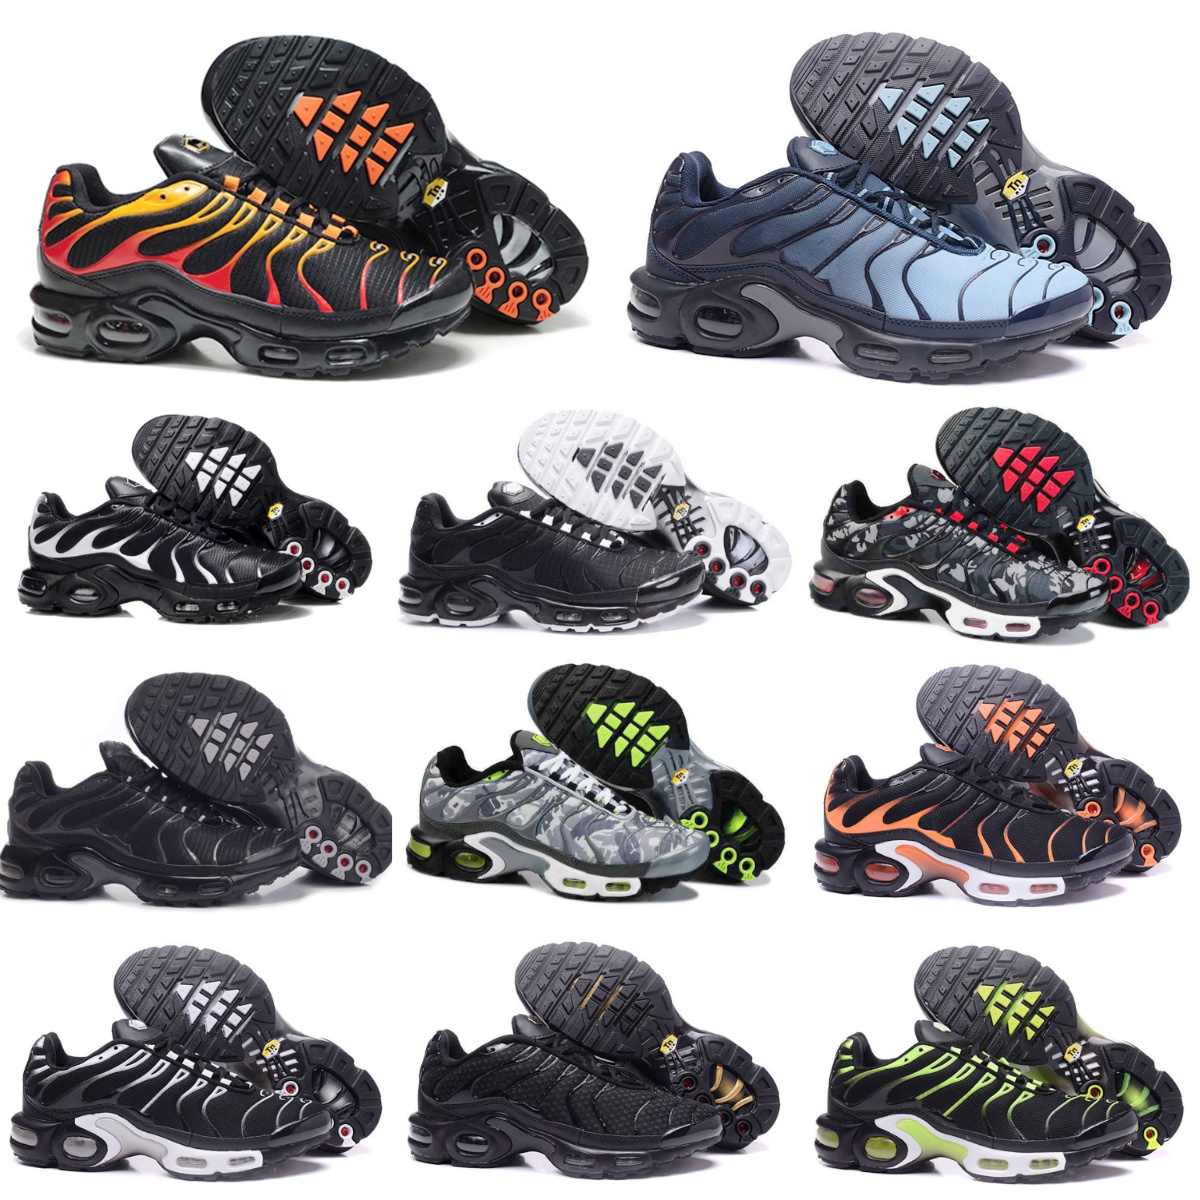 

2023 Mens Tn Running Shoes Tns OG Triple Black White Teal Volt Blue Crinkled Metal Chaussures Requin Be True Max Plus Ultra Seafoam Grey Frost Pink Designer Sneakers S2, Please contact us